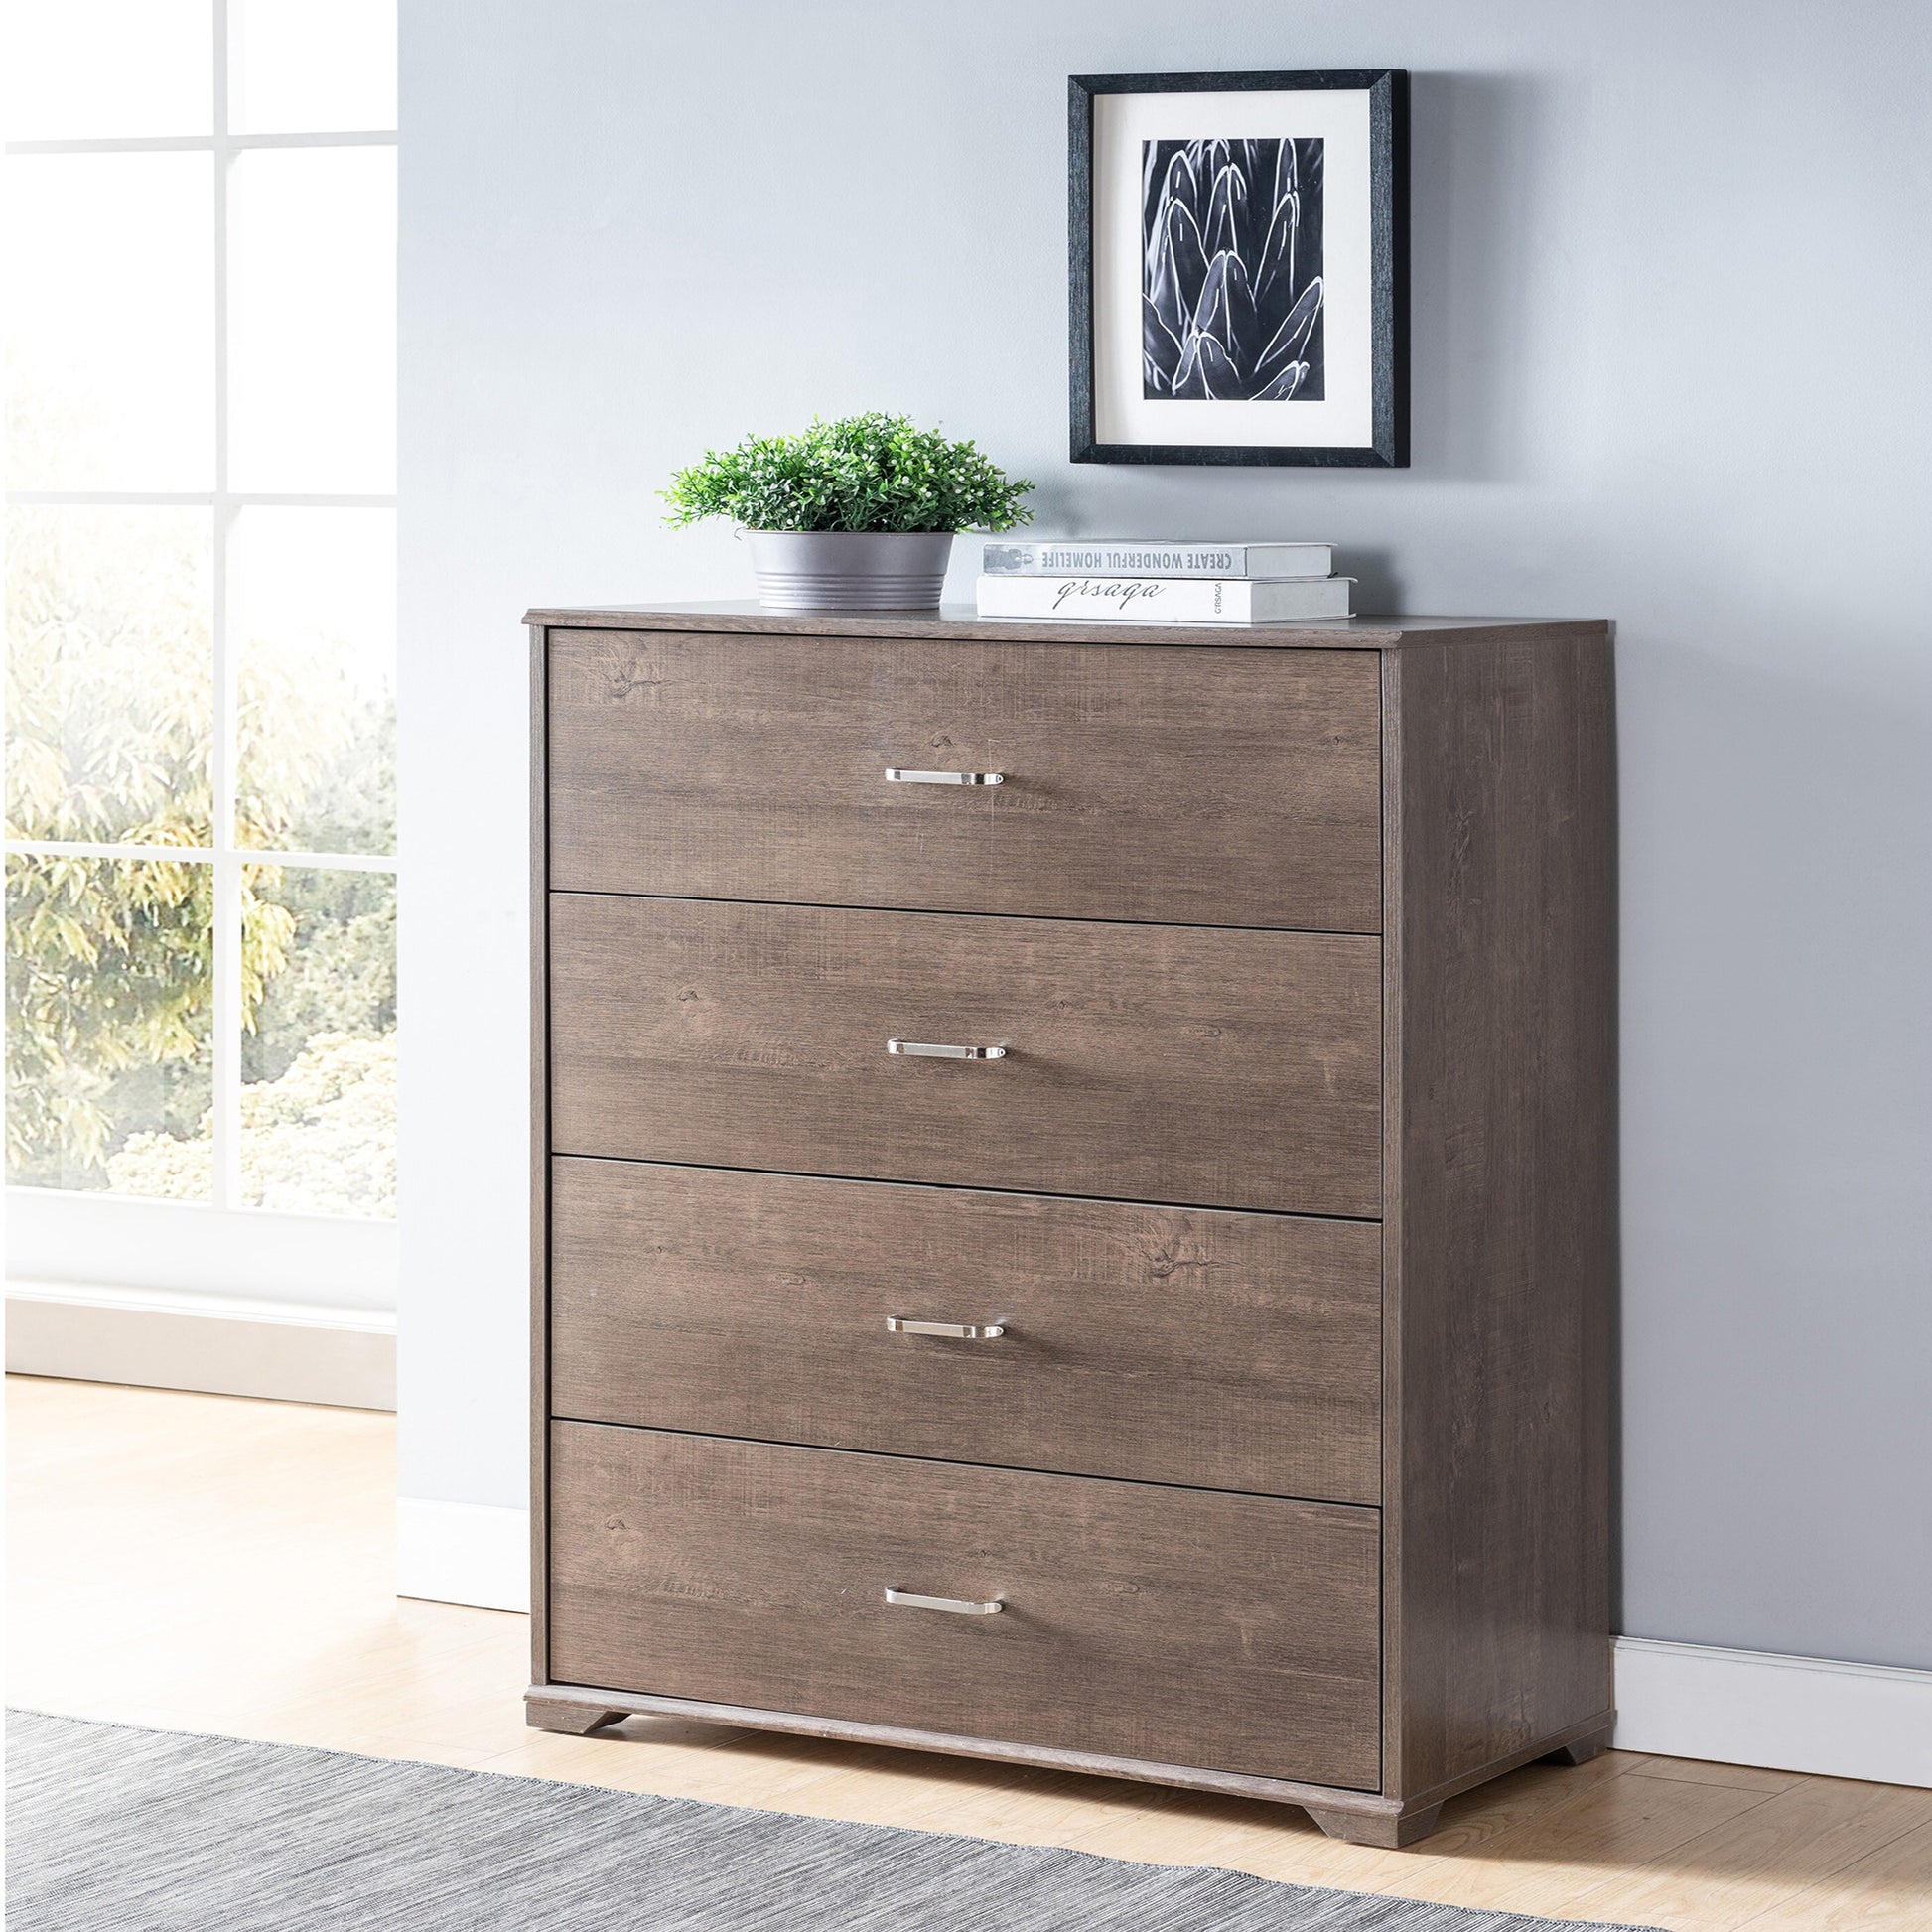 Left angled contemporary walnut four-drawer chest dresser in a bedroom with accessories